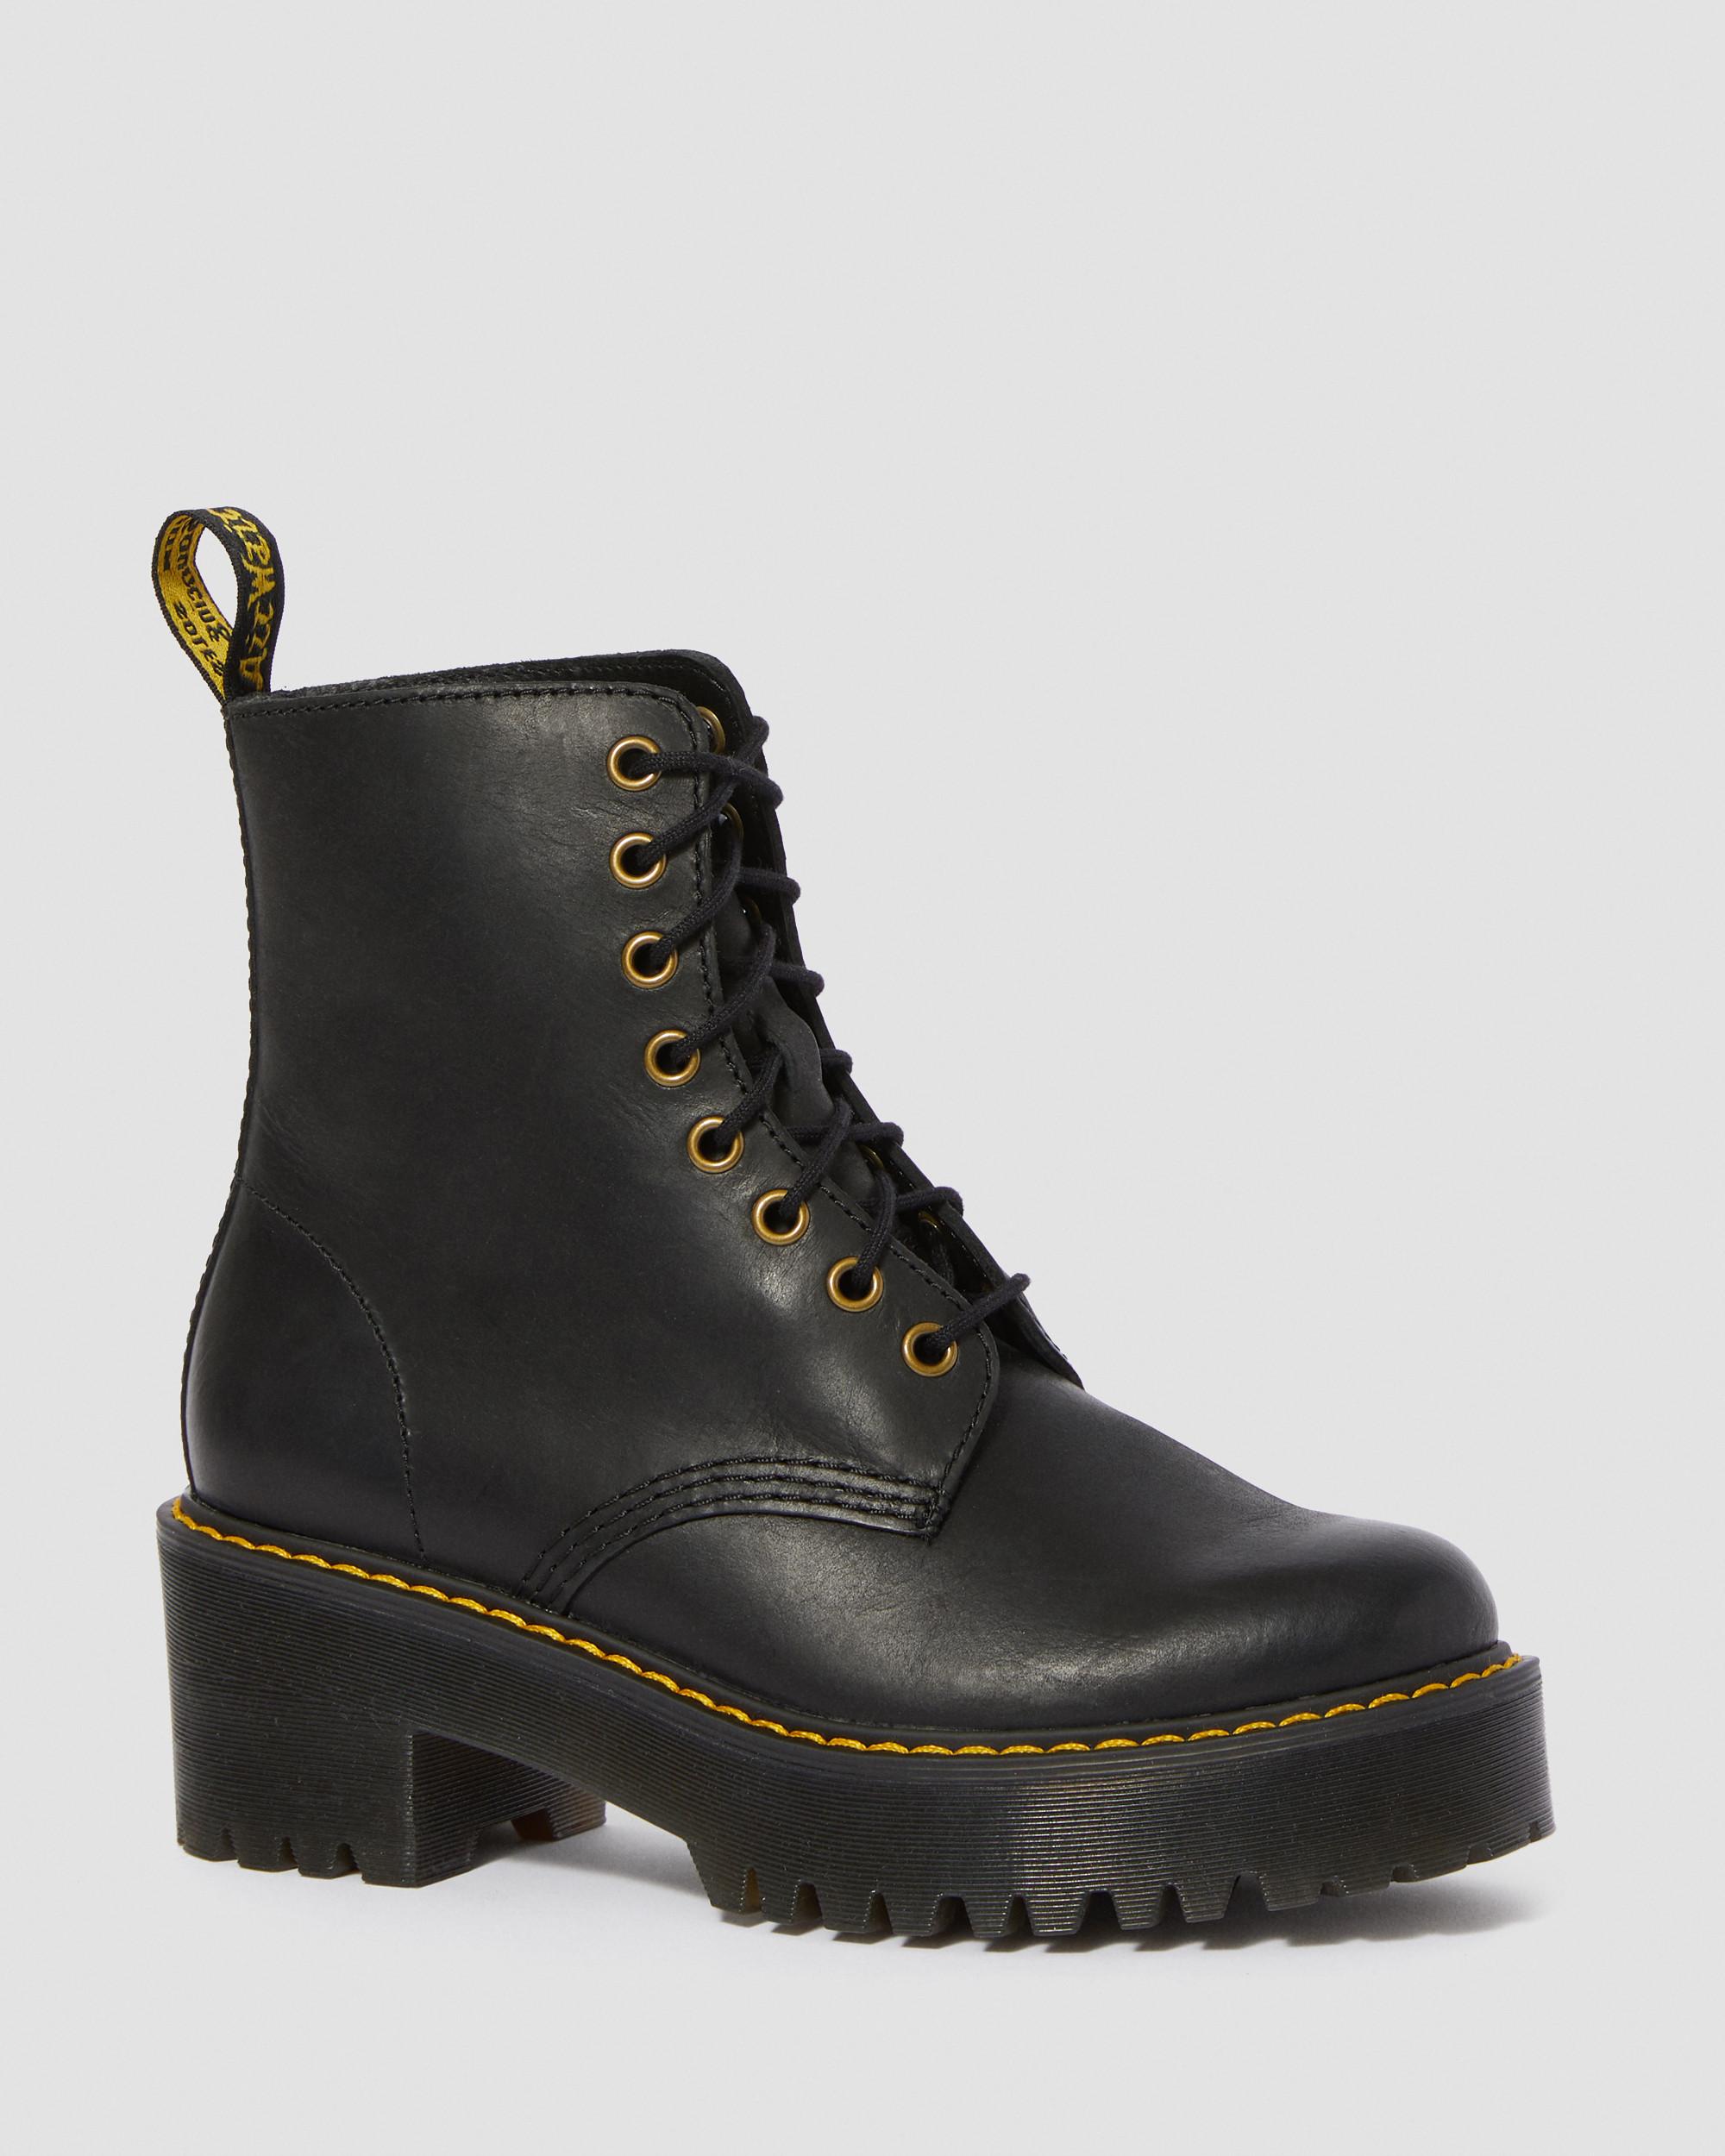 similar boots to doc martens